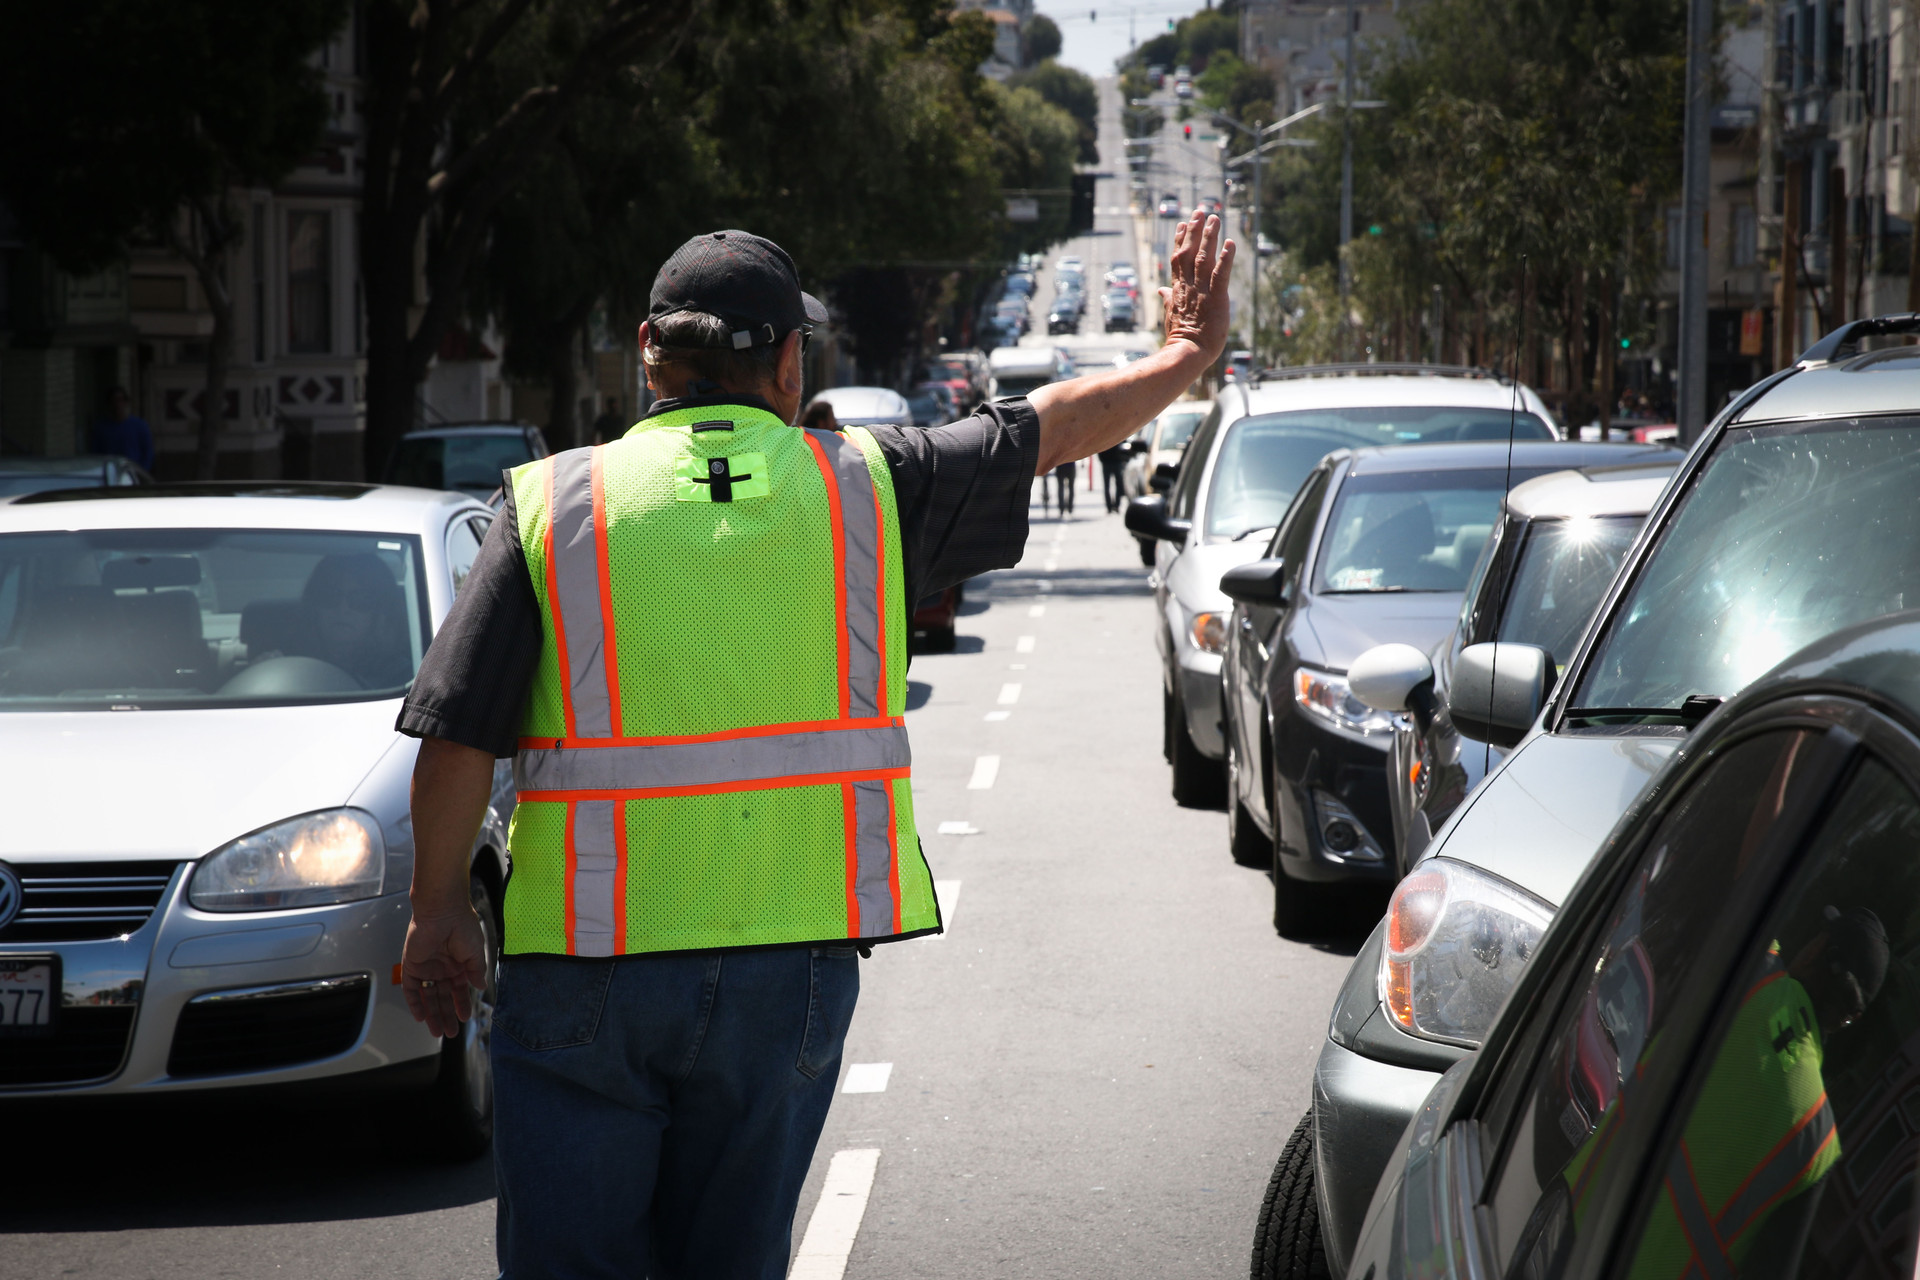 Jimenez says sometimes looking official means his parking crew is verbally assaulted by drivers, especially when big events happen like Bay to Breakers.